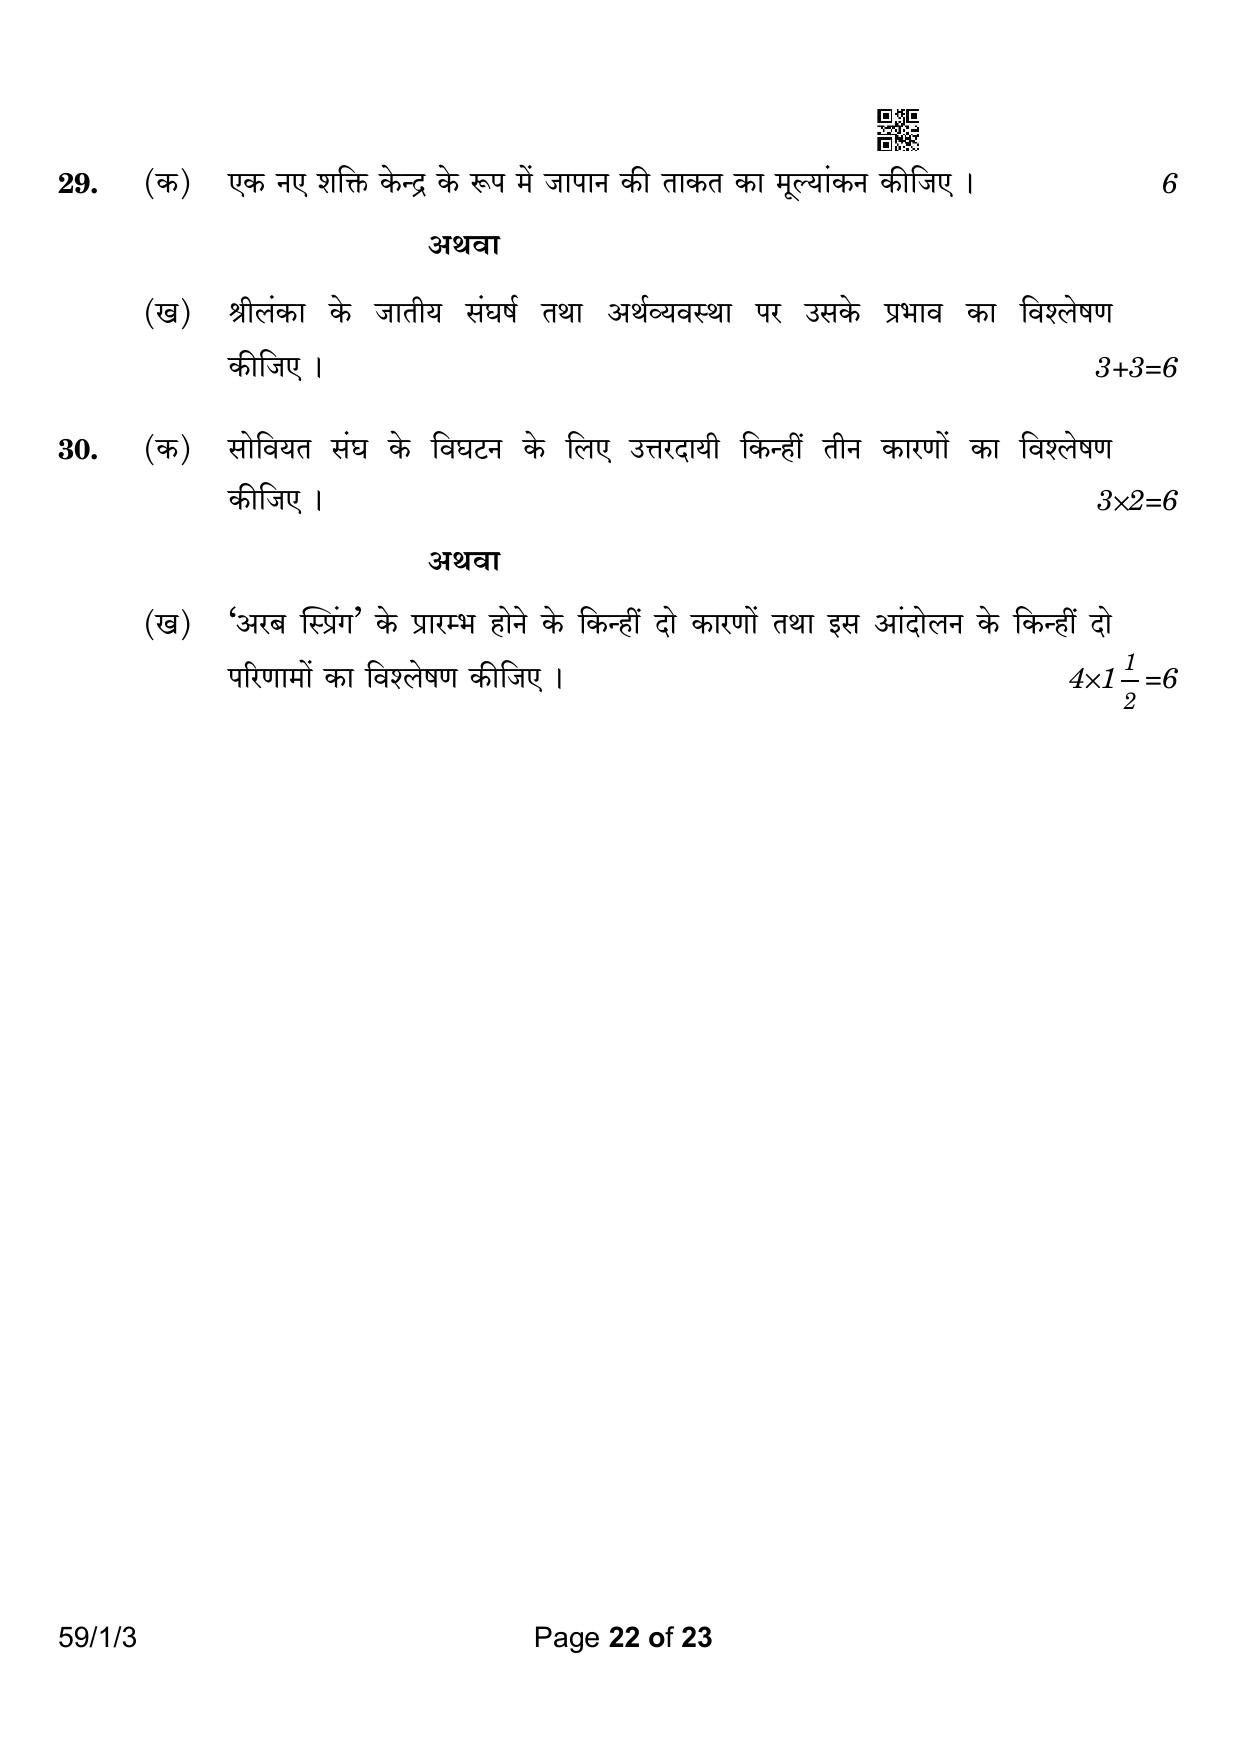 CBSE Class 12 59-1-3 Political Science 2023 Question Paper - Page 22